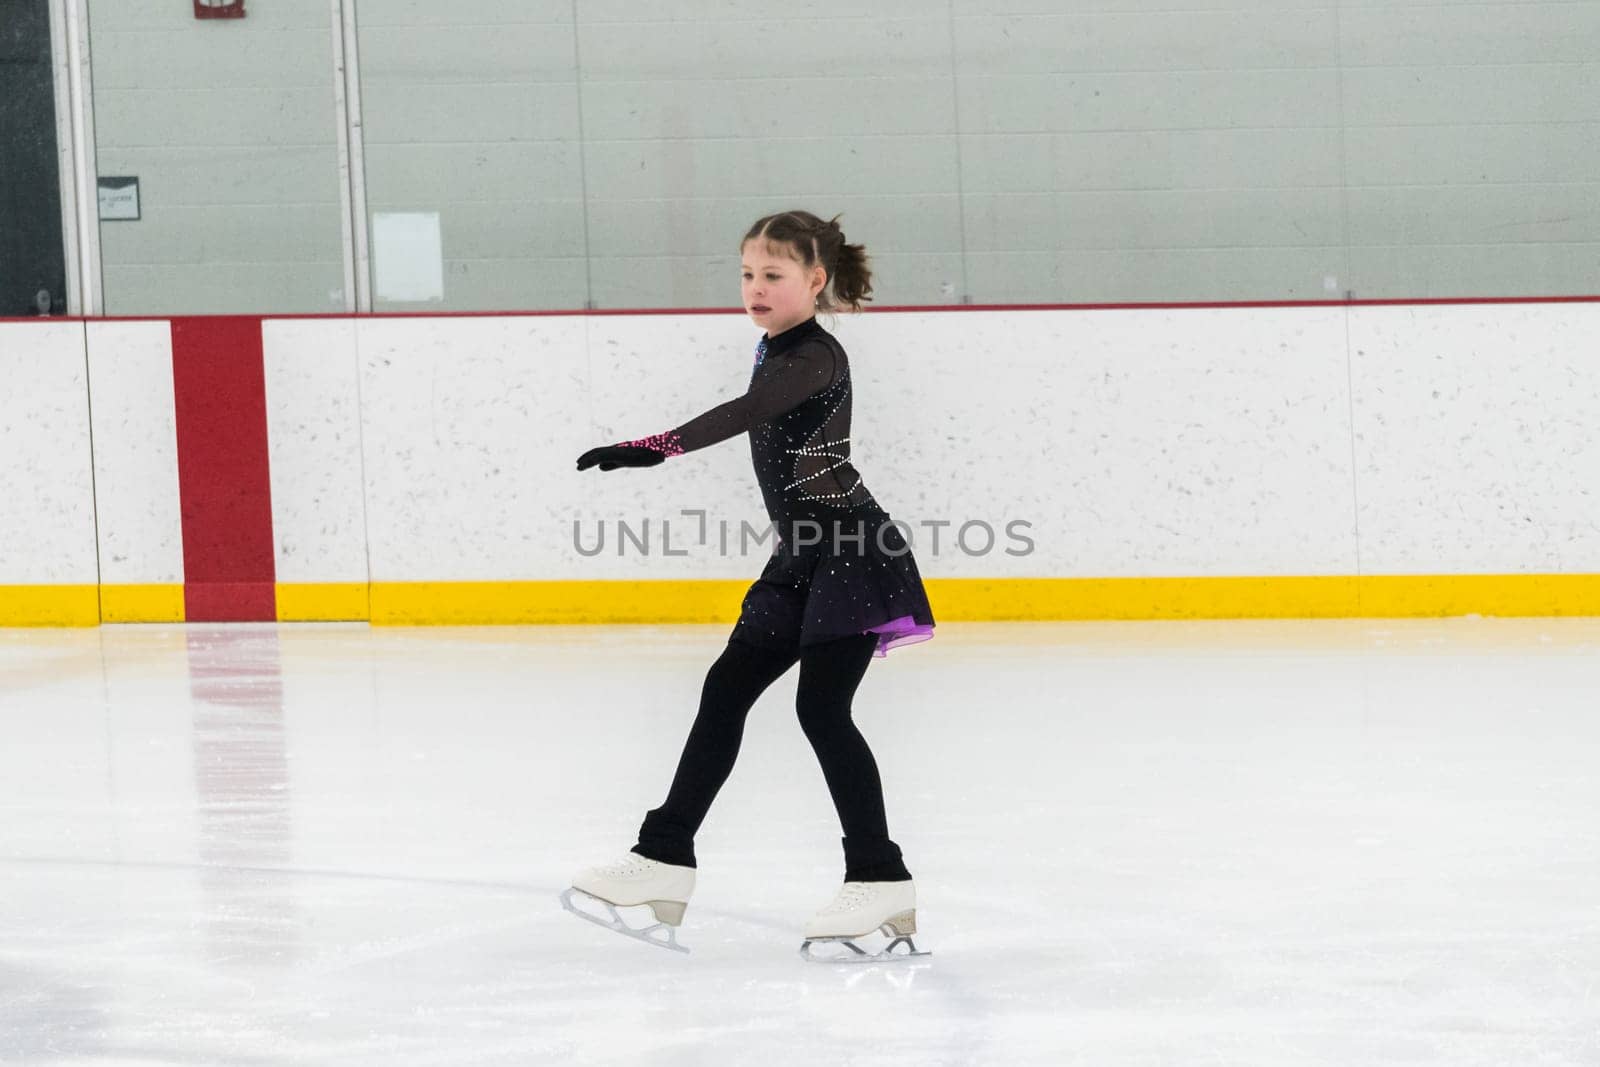 Figure skating practice at an indoor skating rink by arinahabich